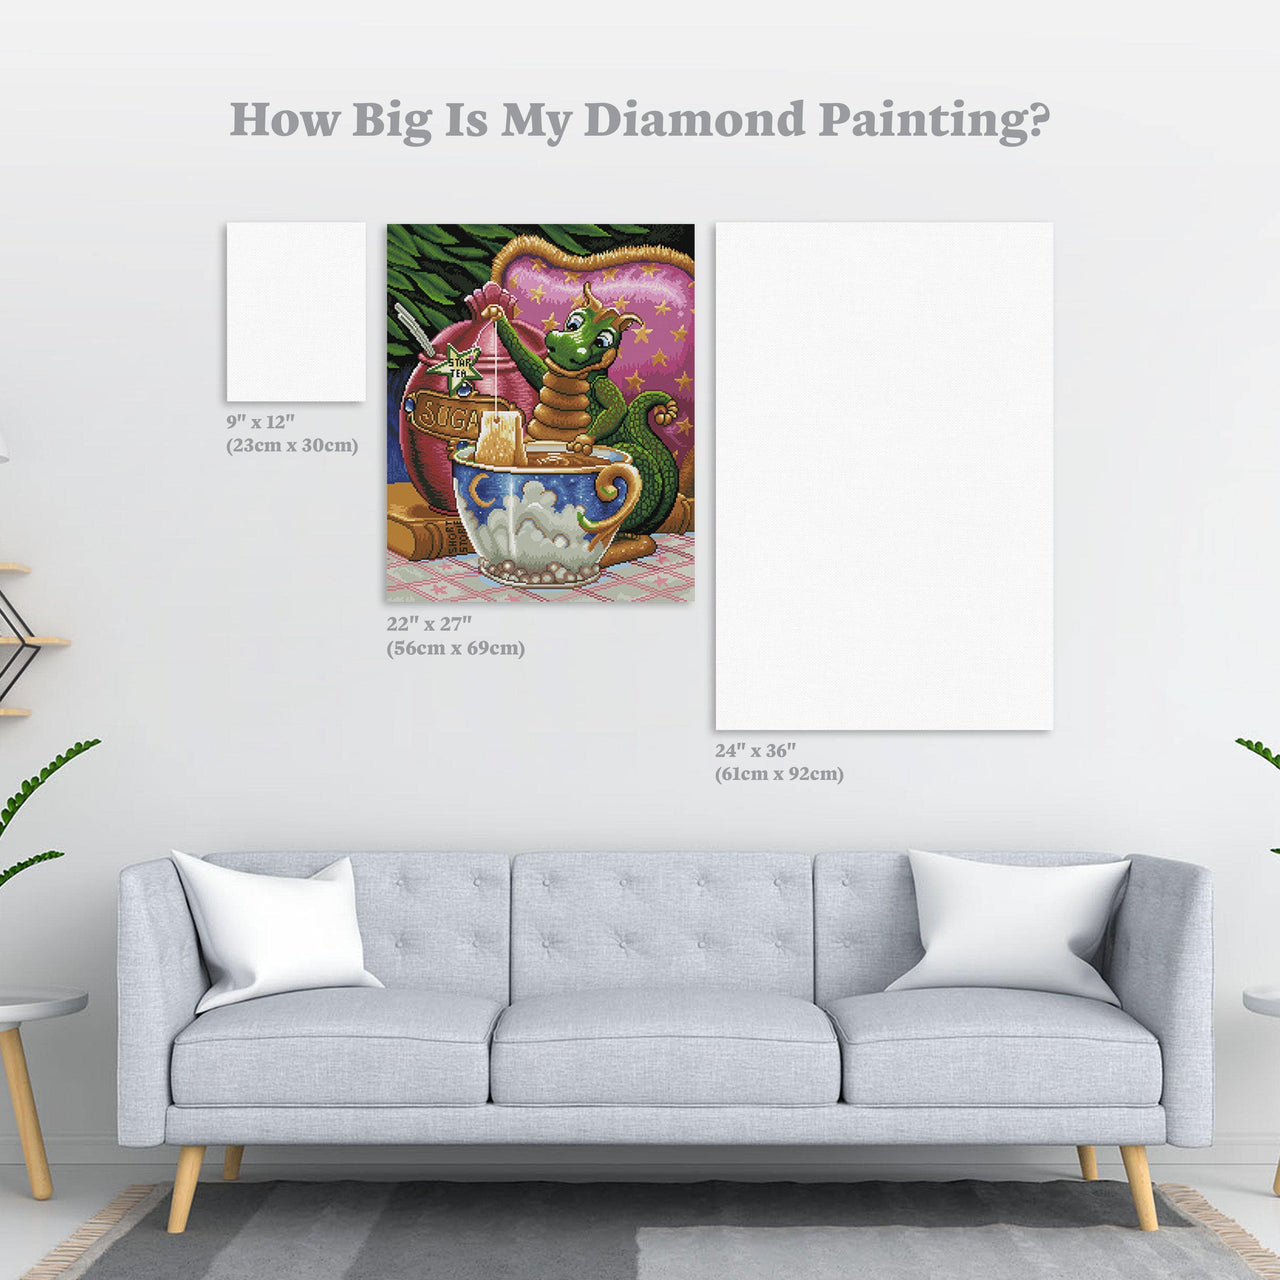 Diamond Painting Afternoon Tea 22" x 27″ (56cm x 69cm) / Round with 50 Colors including 3 ABs / 48,554